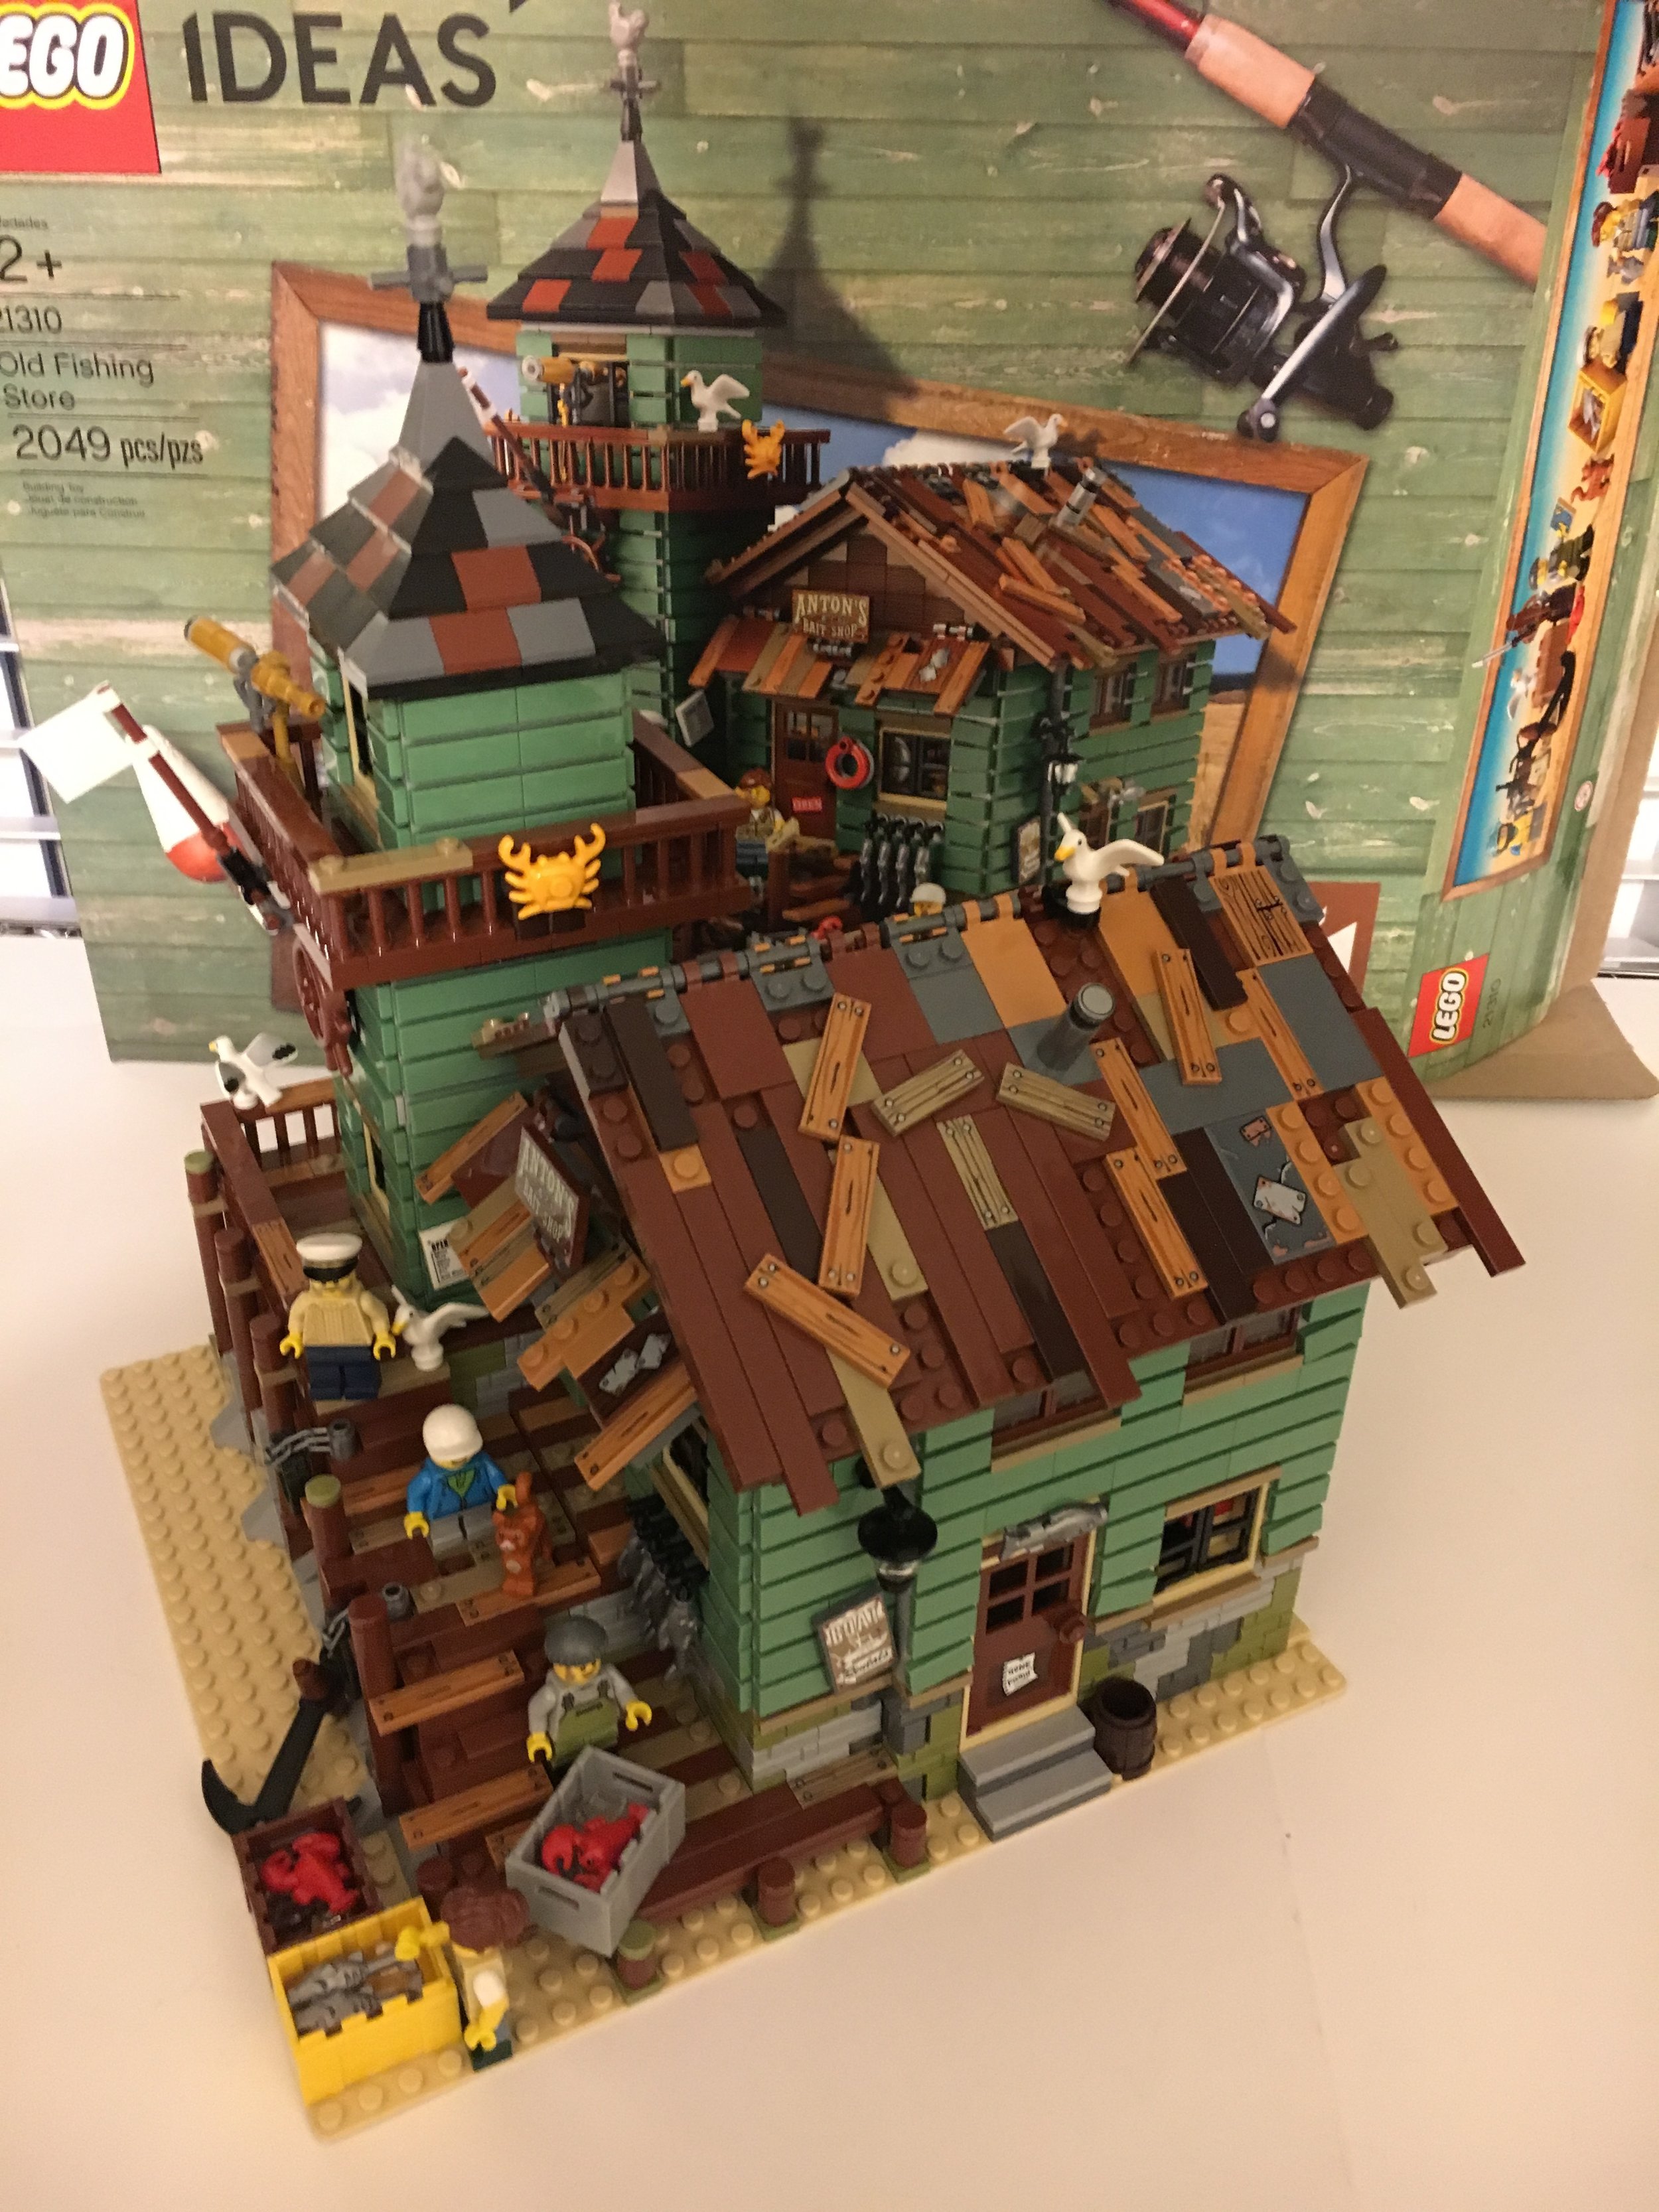 LEGO 21310 Old Fishing Store Review Brickset, 43% OFF